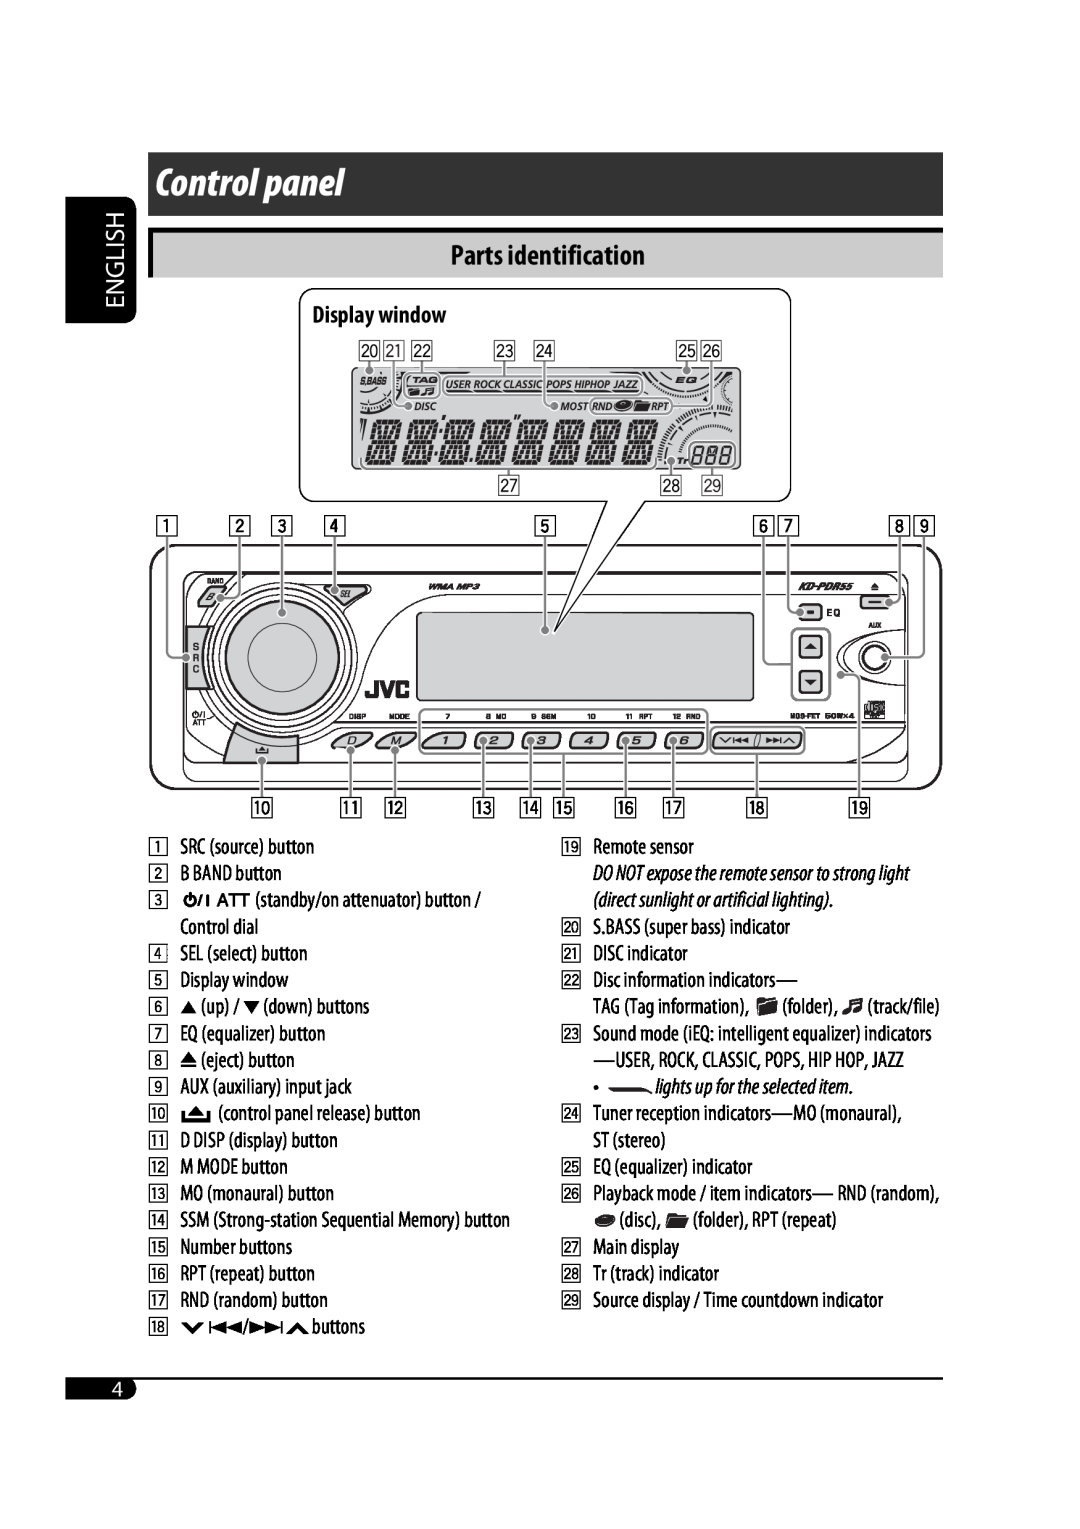 JVC GET0425-001A Control panel, Parts identification, English, Display window, direct sunlight or artificial lighting 